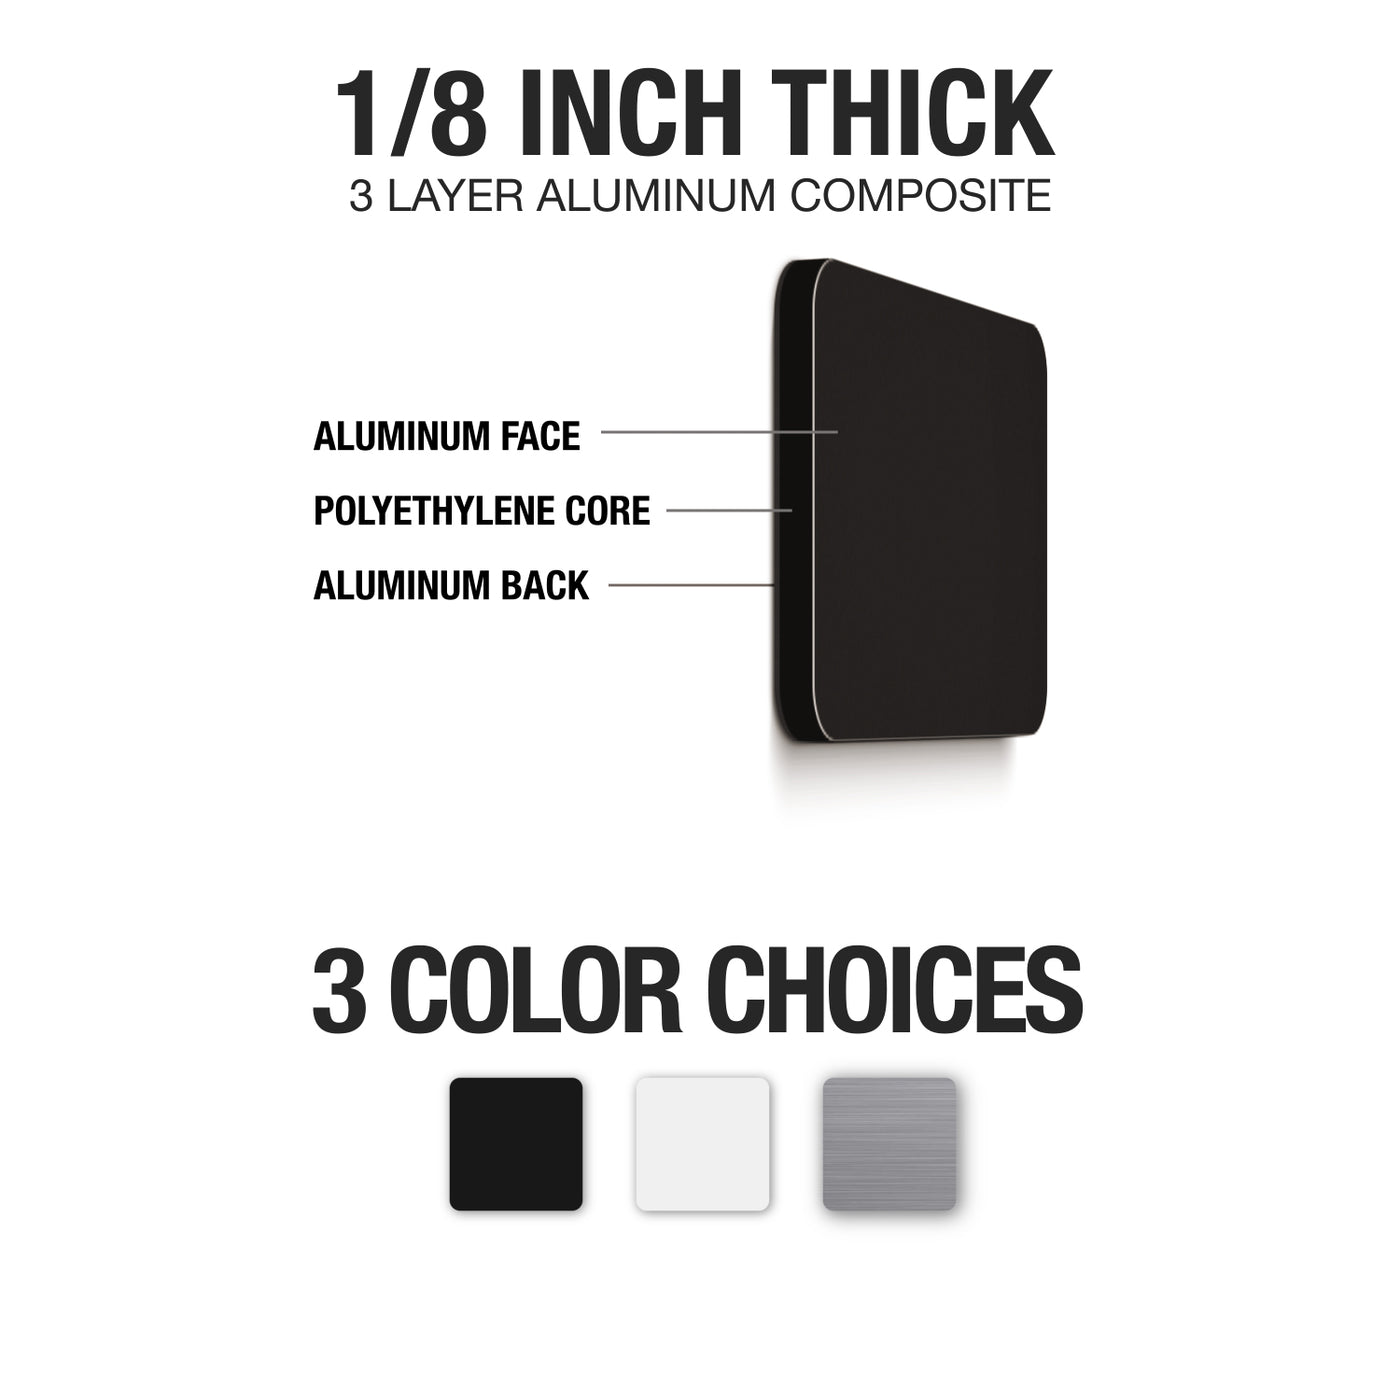 Graphic of 1/8 inch thickness and color choices.